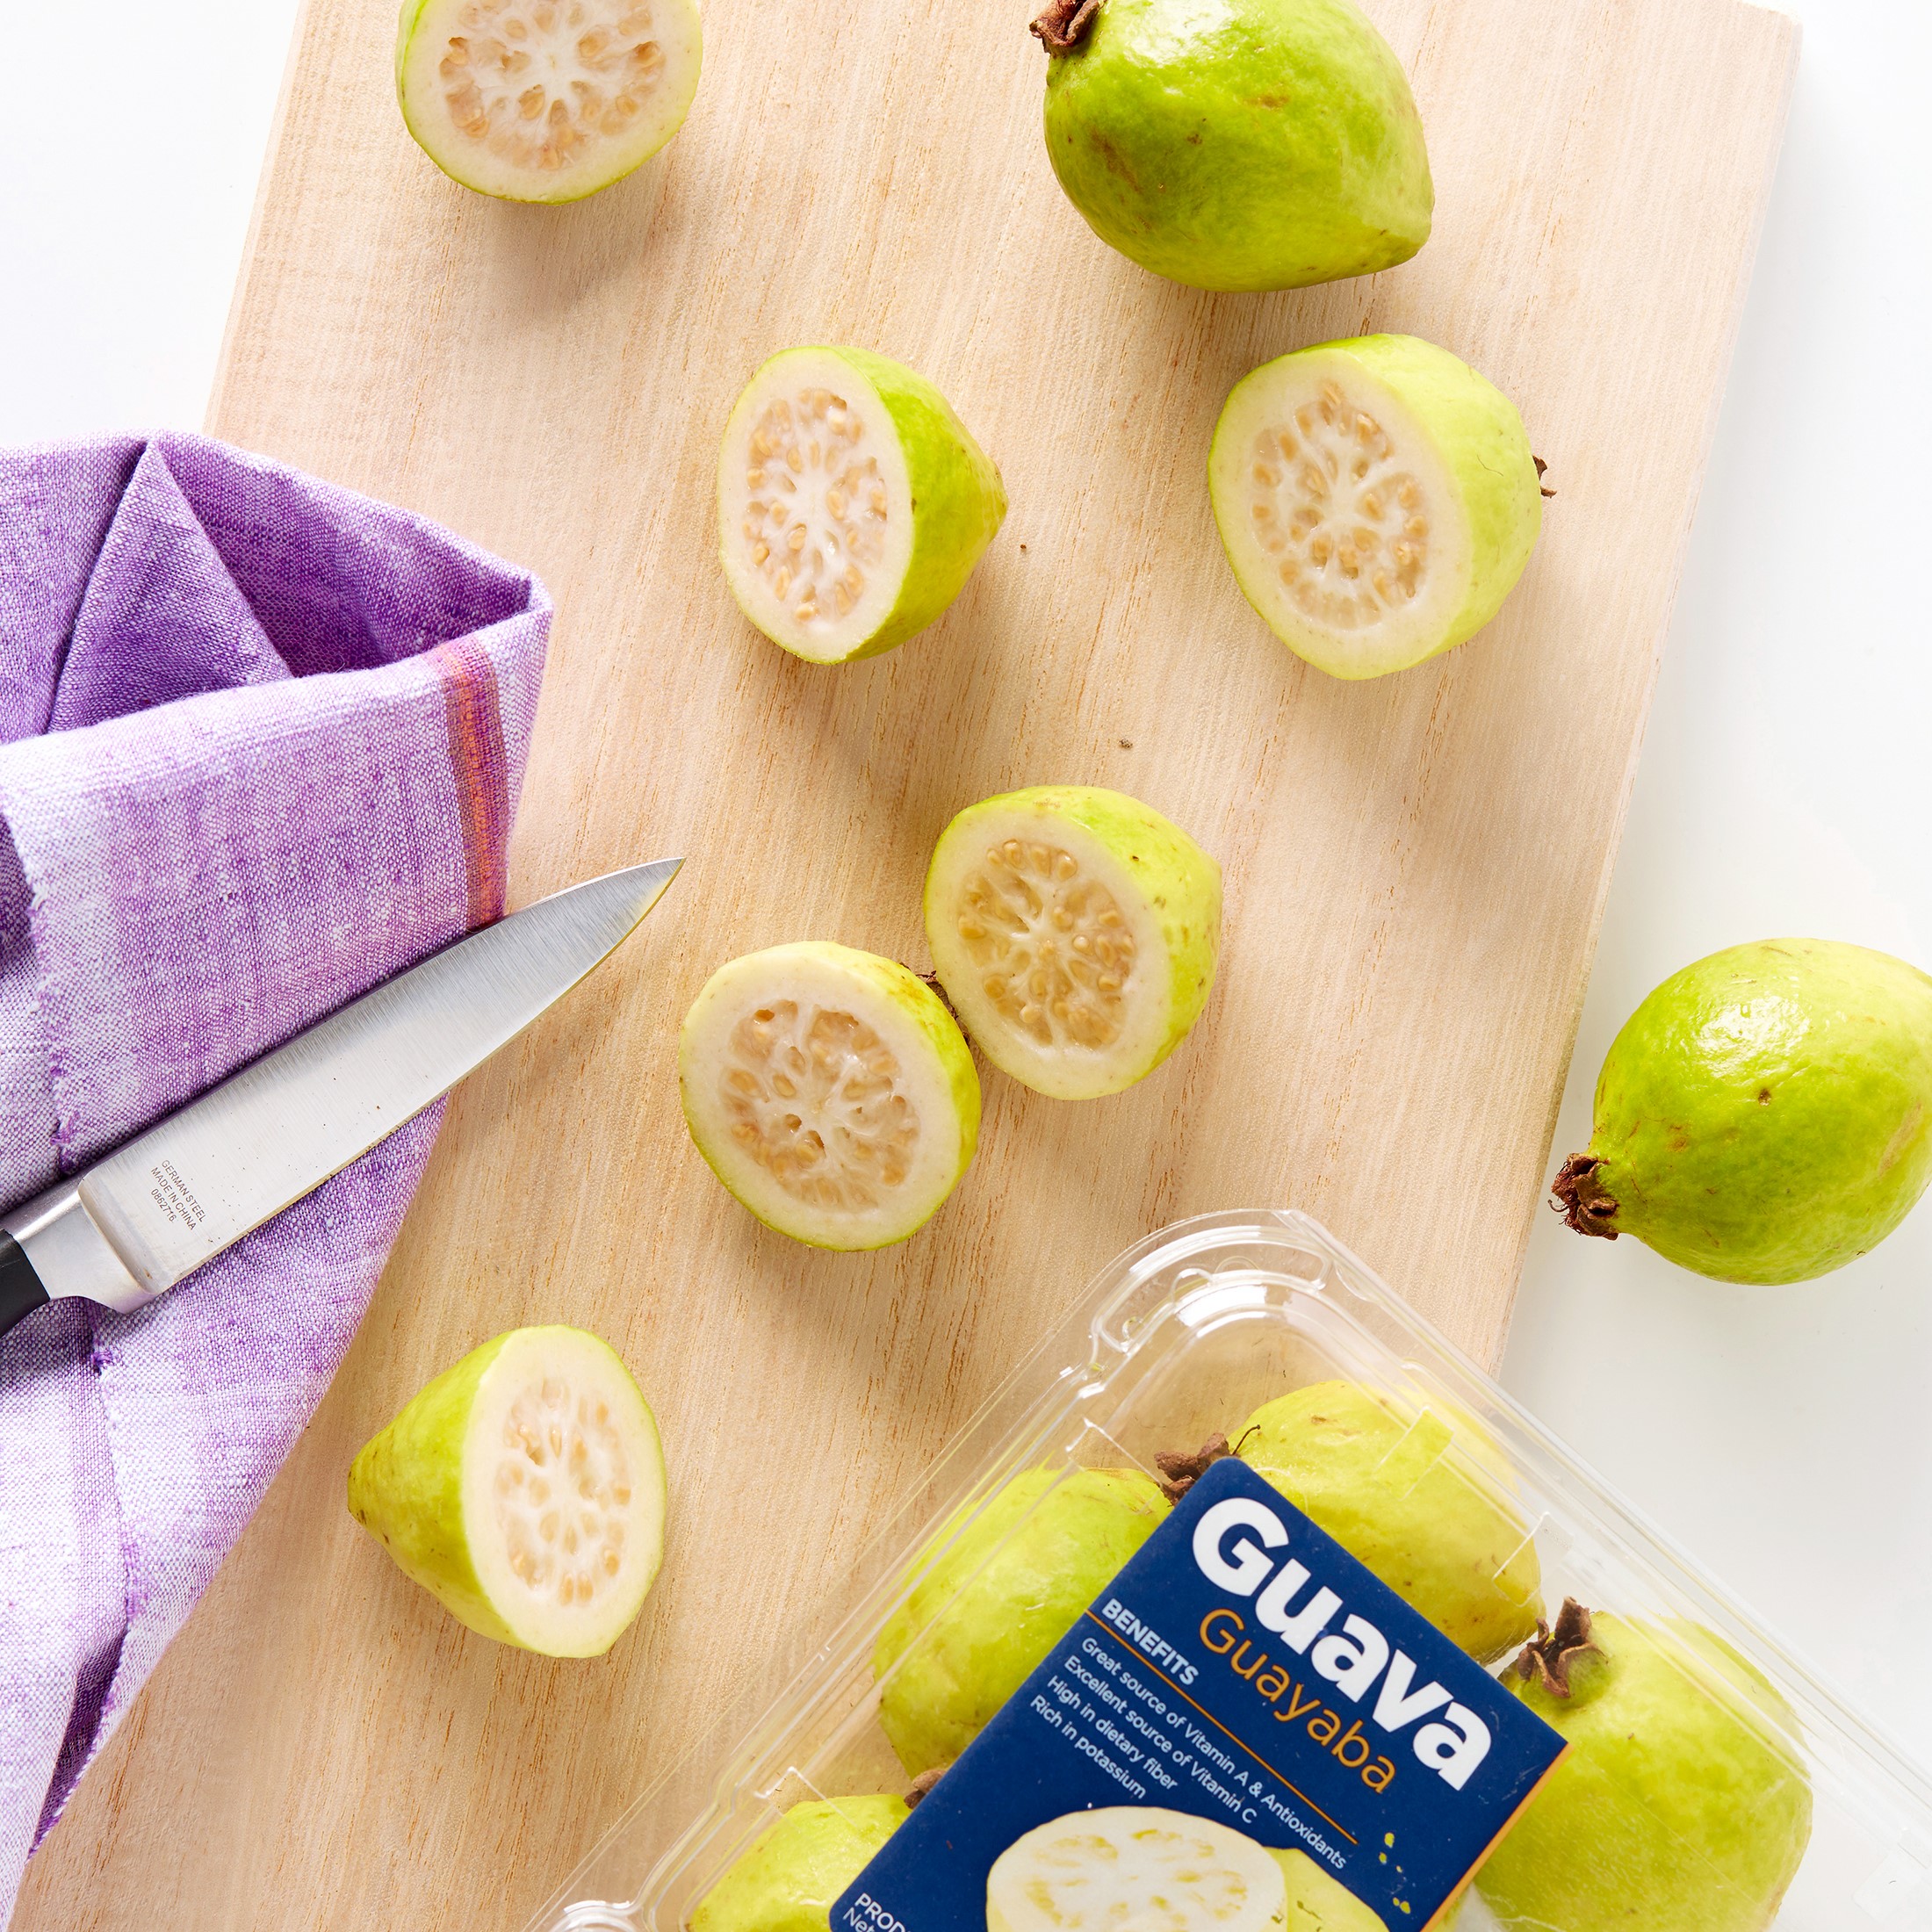 Guava, 1 lb Clamshell - image 4 of 7